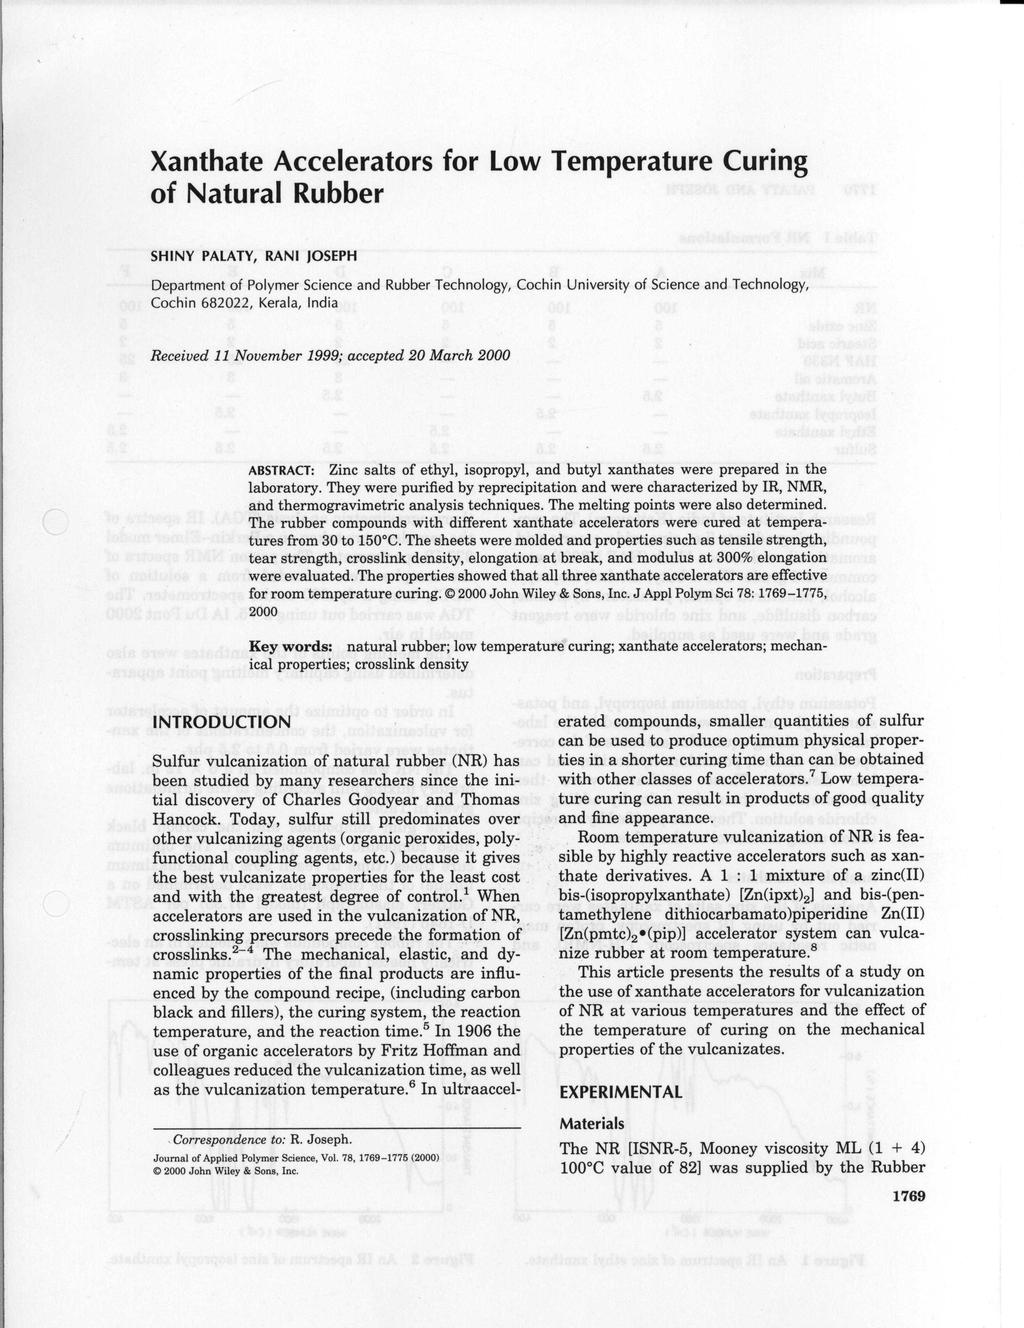 Xanthate Accelerators for Low Temperature Curing of Natural Rubber SHINY PALATY, RANI JOSEPH Department of Polymer Science and Rubber Technology, Cochin University of Science and Technology, Cochin